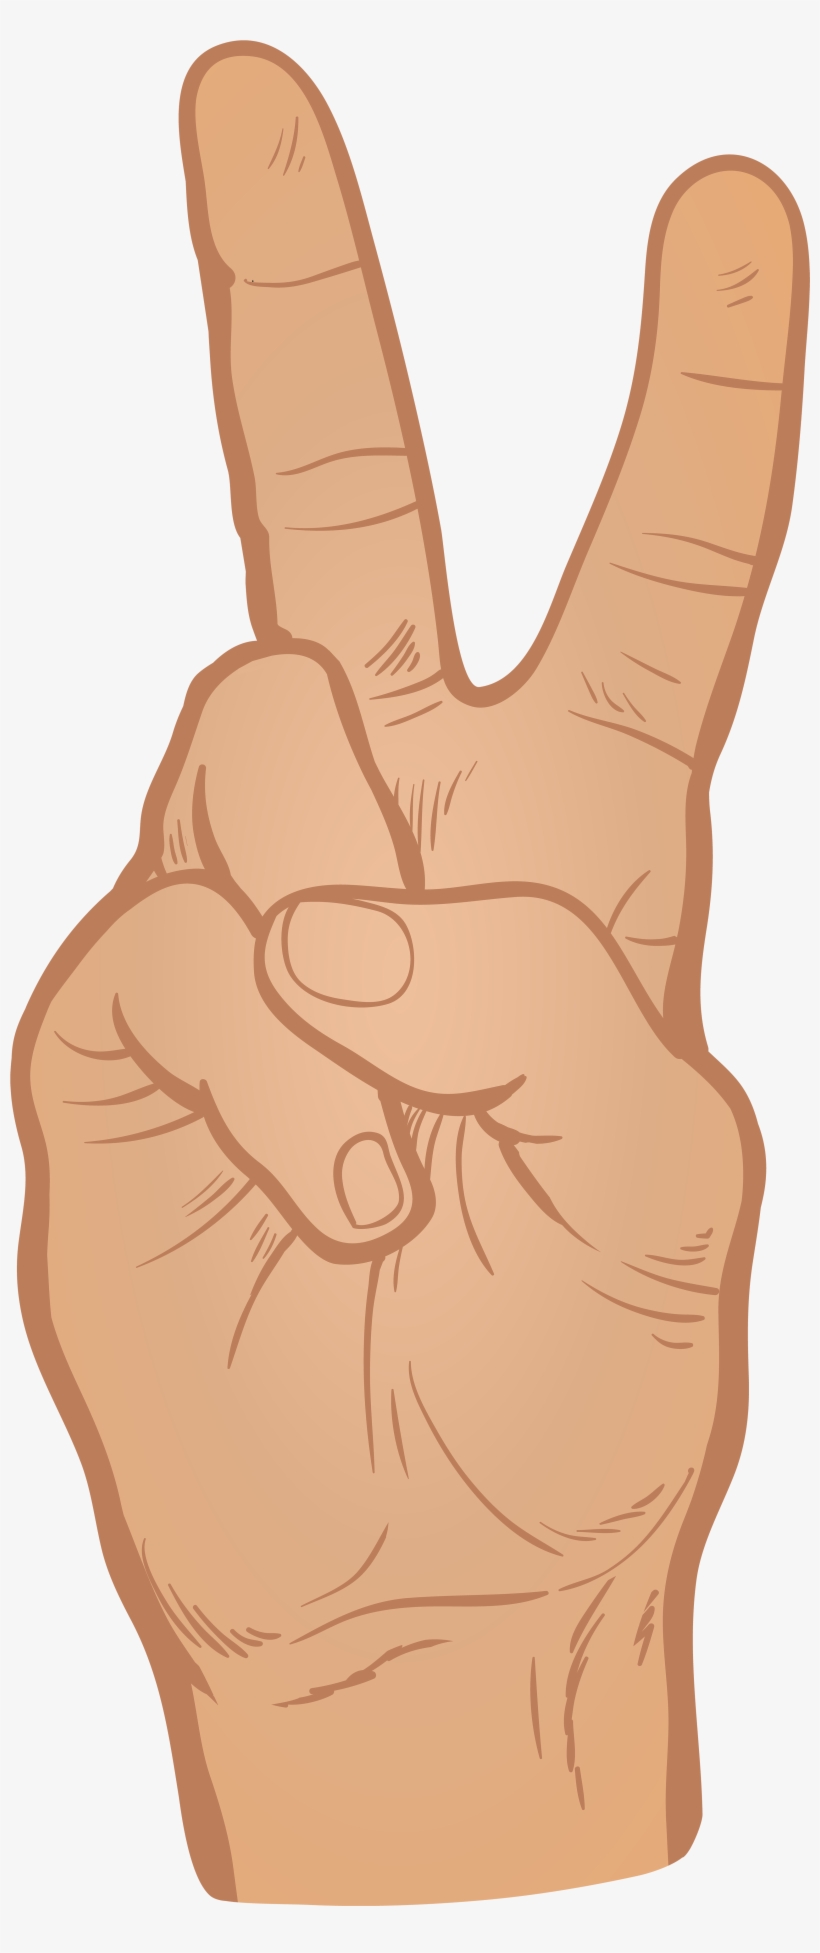 Hand Victory Sign Png, transparent png #1185921